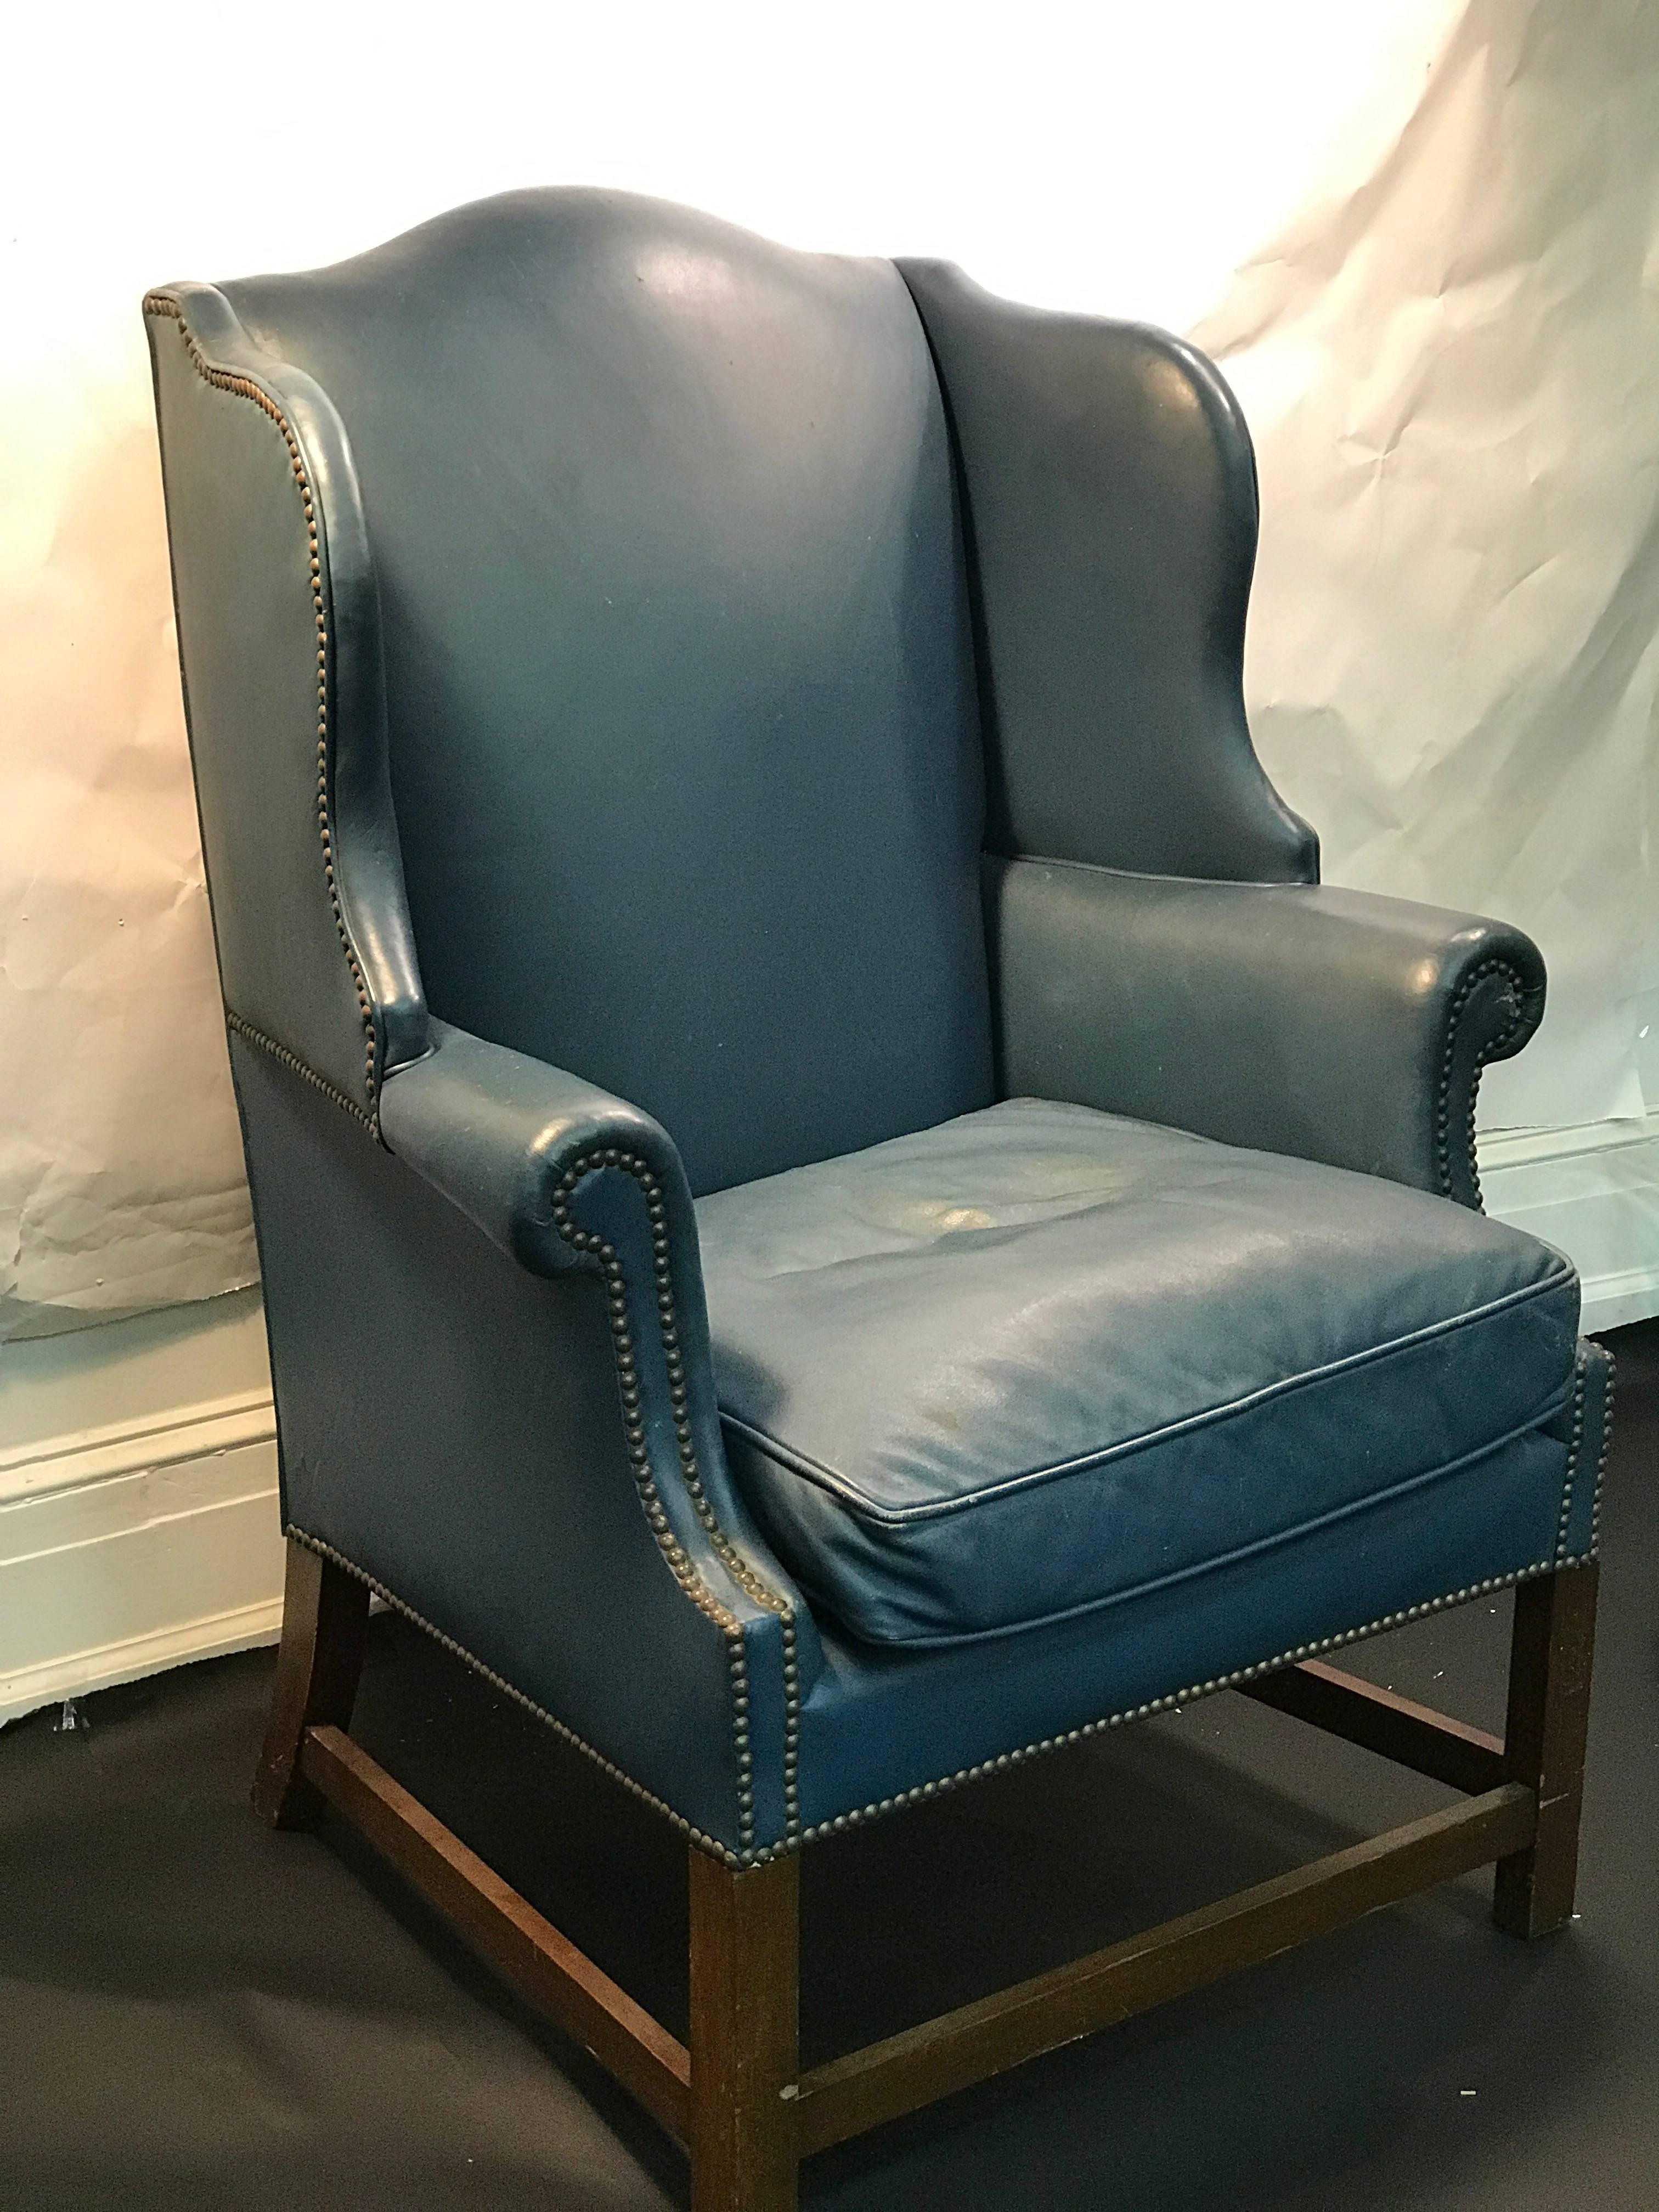 A wonderful wingback chair with beautiful blue original leather upholstery and nailhead detail, circa 1960. Good vintage condition with age appropriate wear.